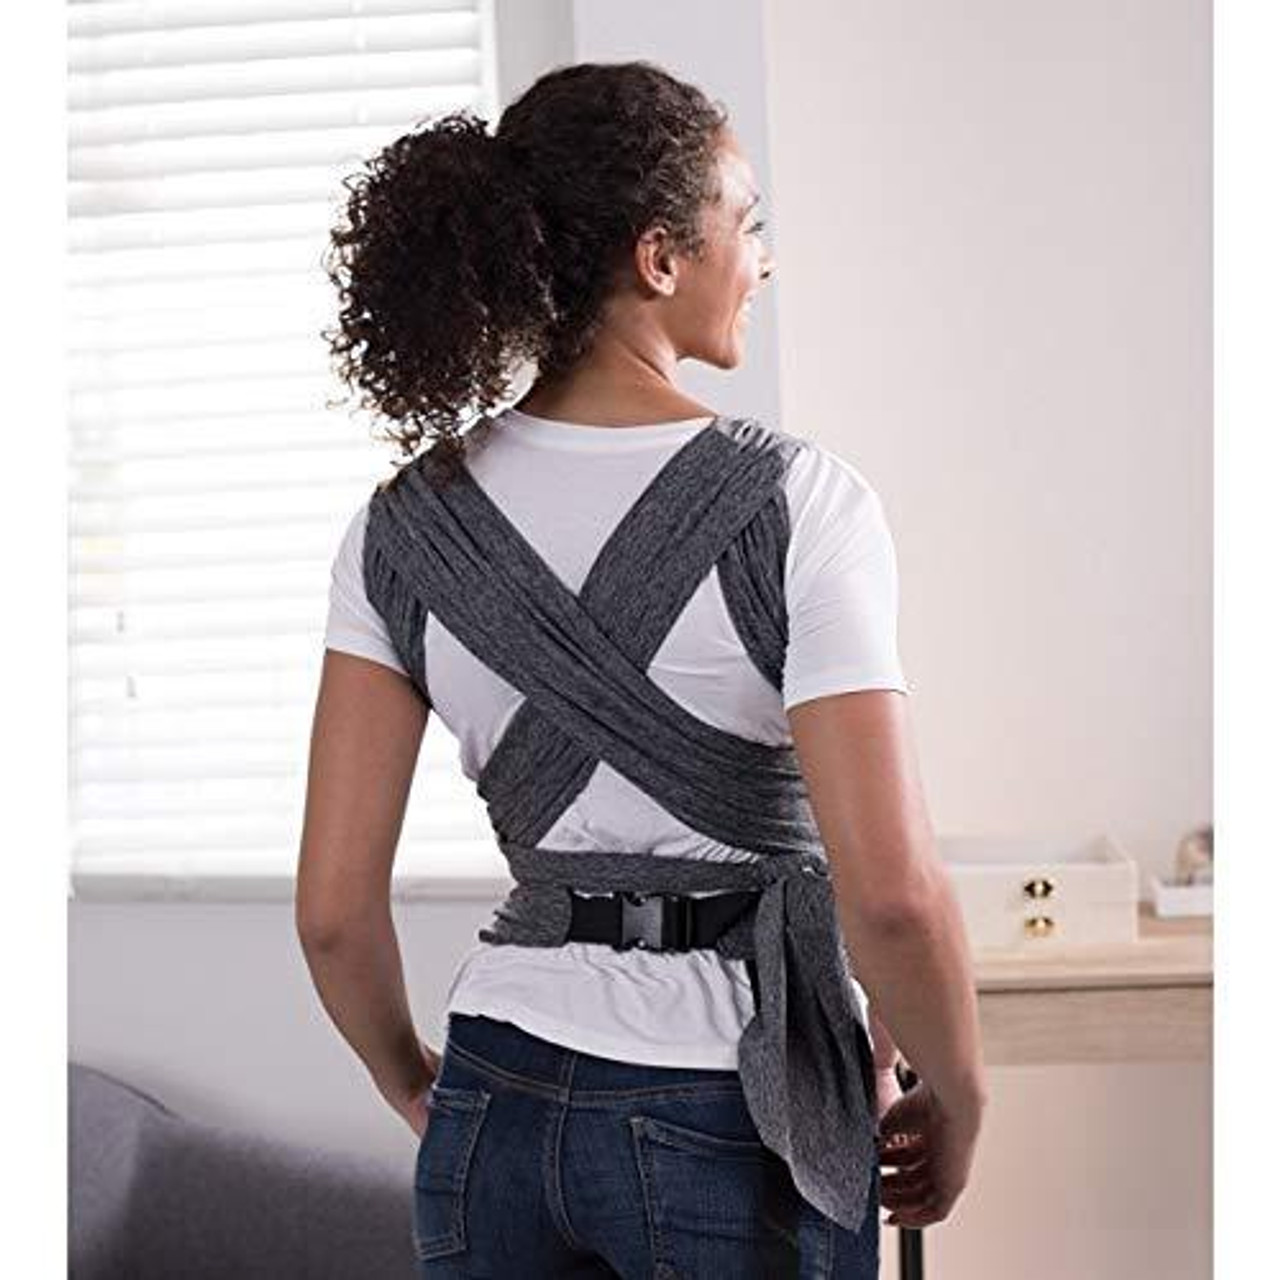 Boppy Comfy fit Baby Carrier Grey 